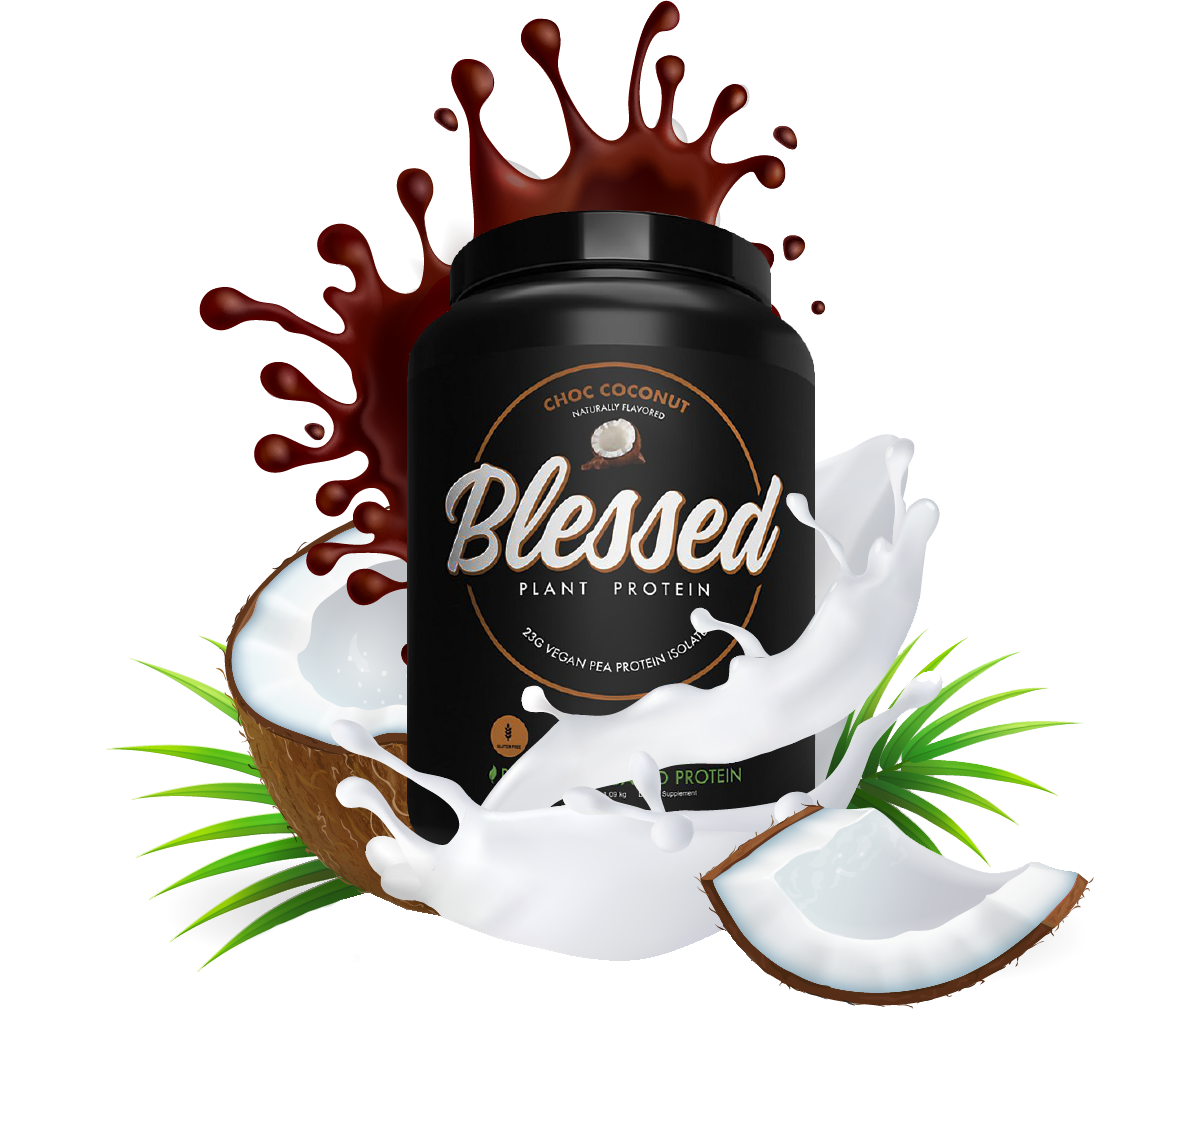 BLESSED PLANT PROTEIN